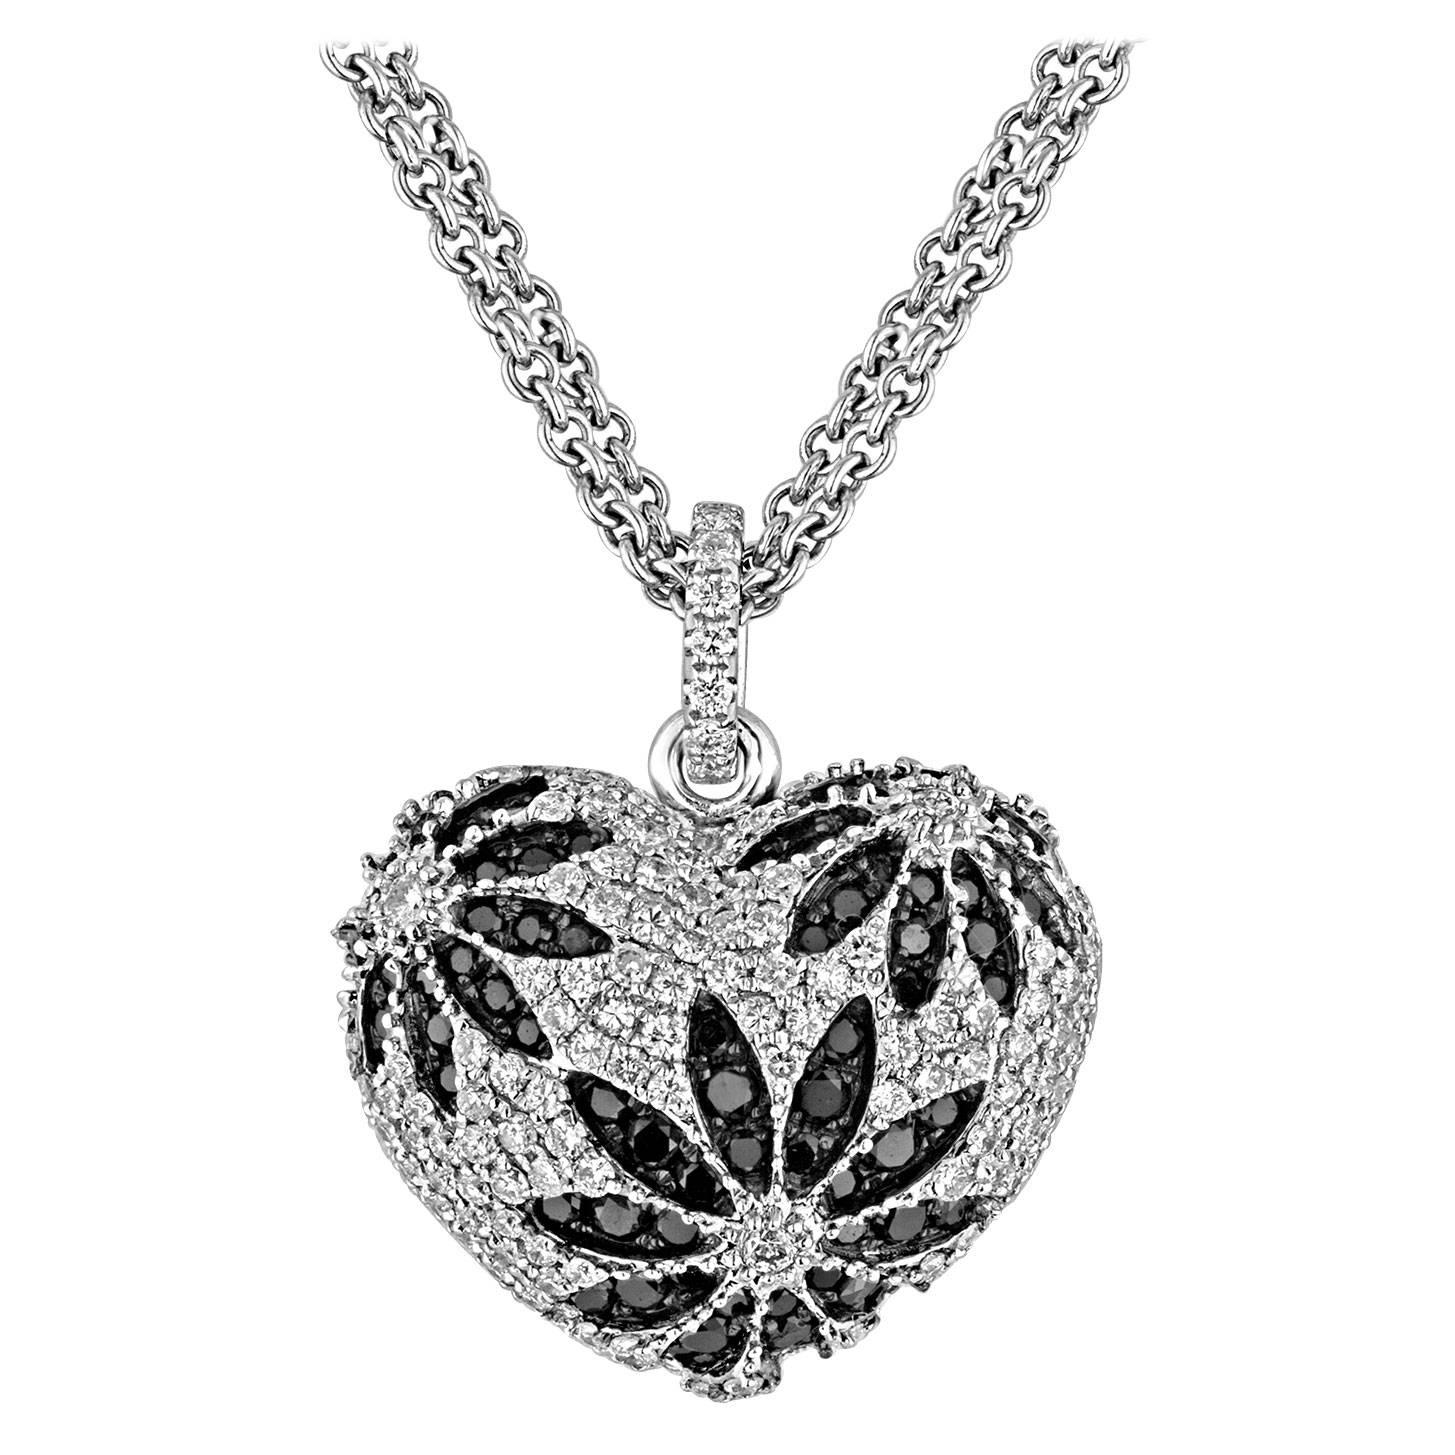 1.84 Carats Black and White Diamond Gold Heart Pendant Necklace For Sale